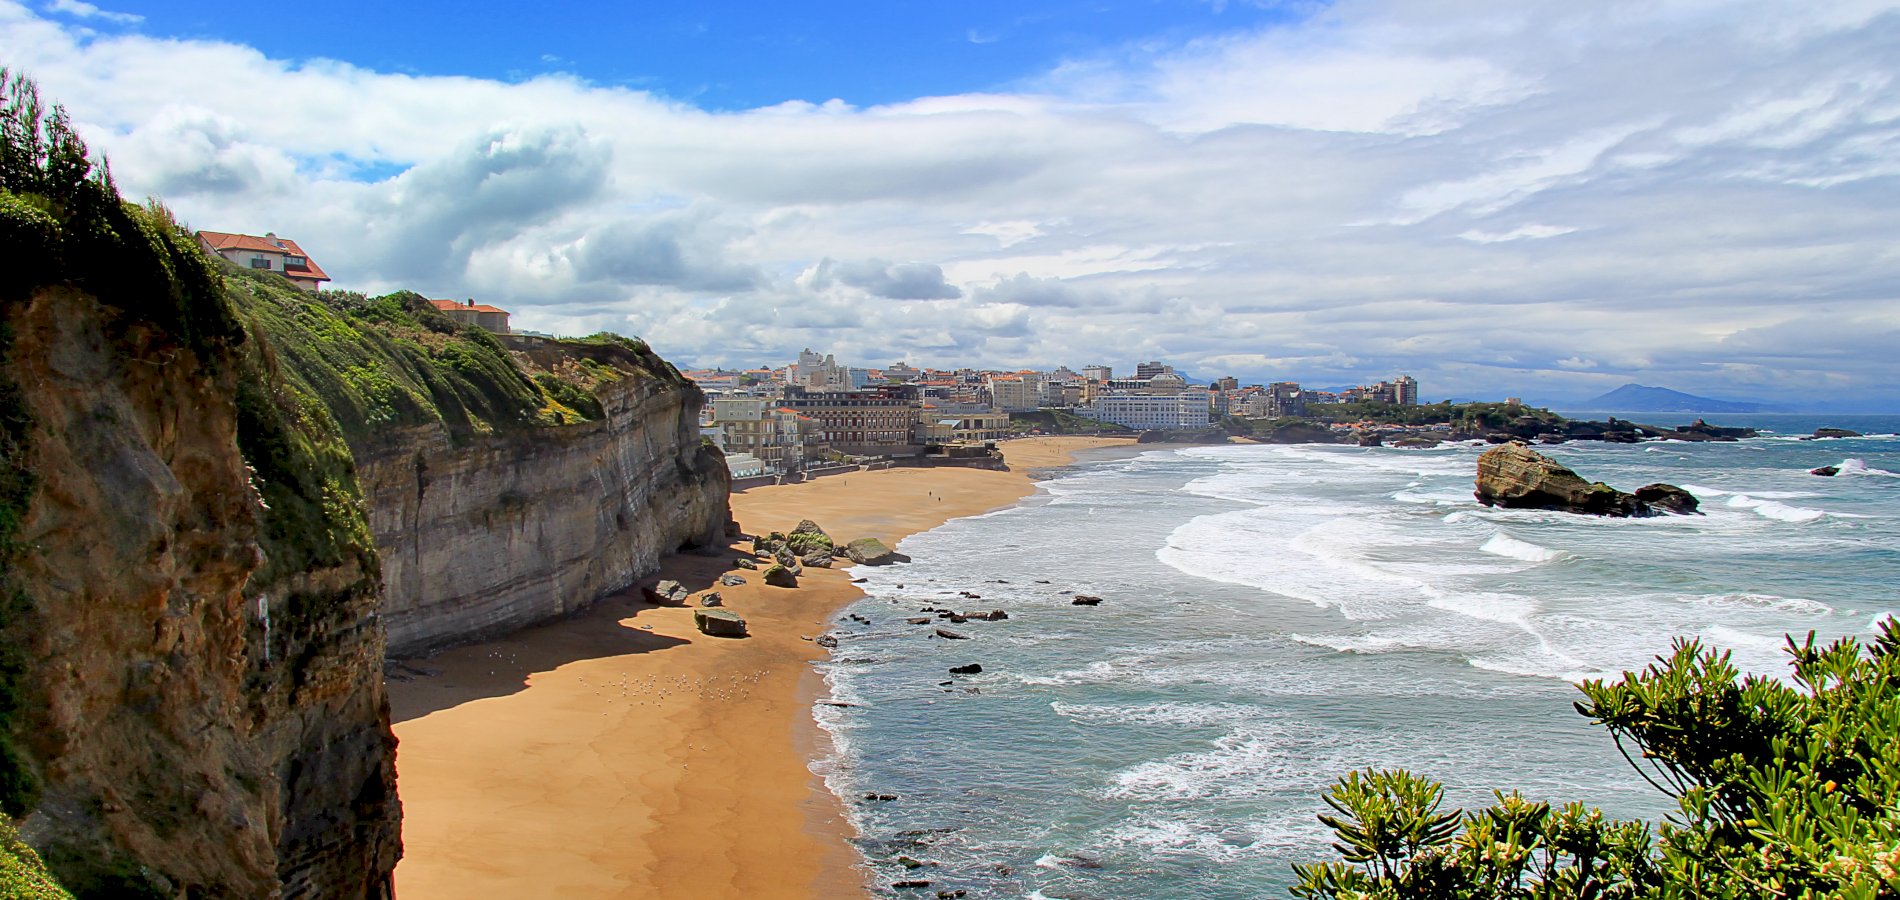 Ophorus Tours - A Private Day Trip From Bordeaux to the French Basque Country